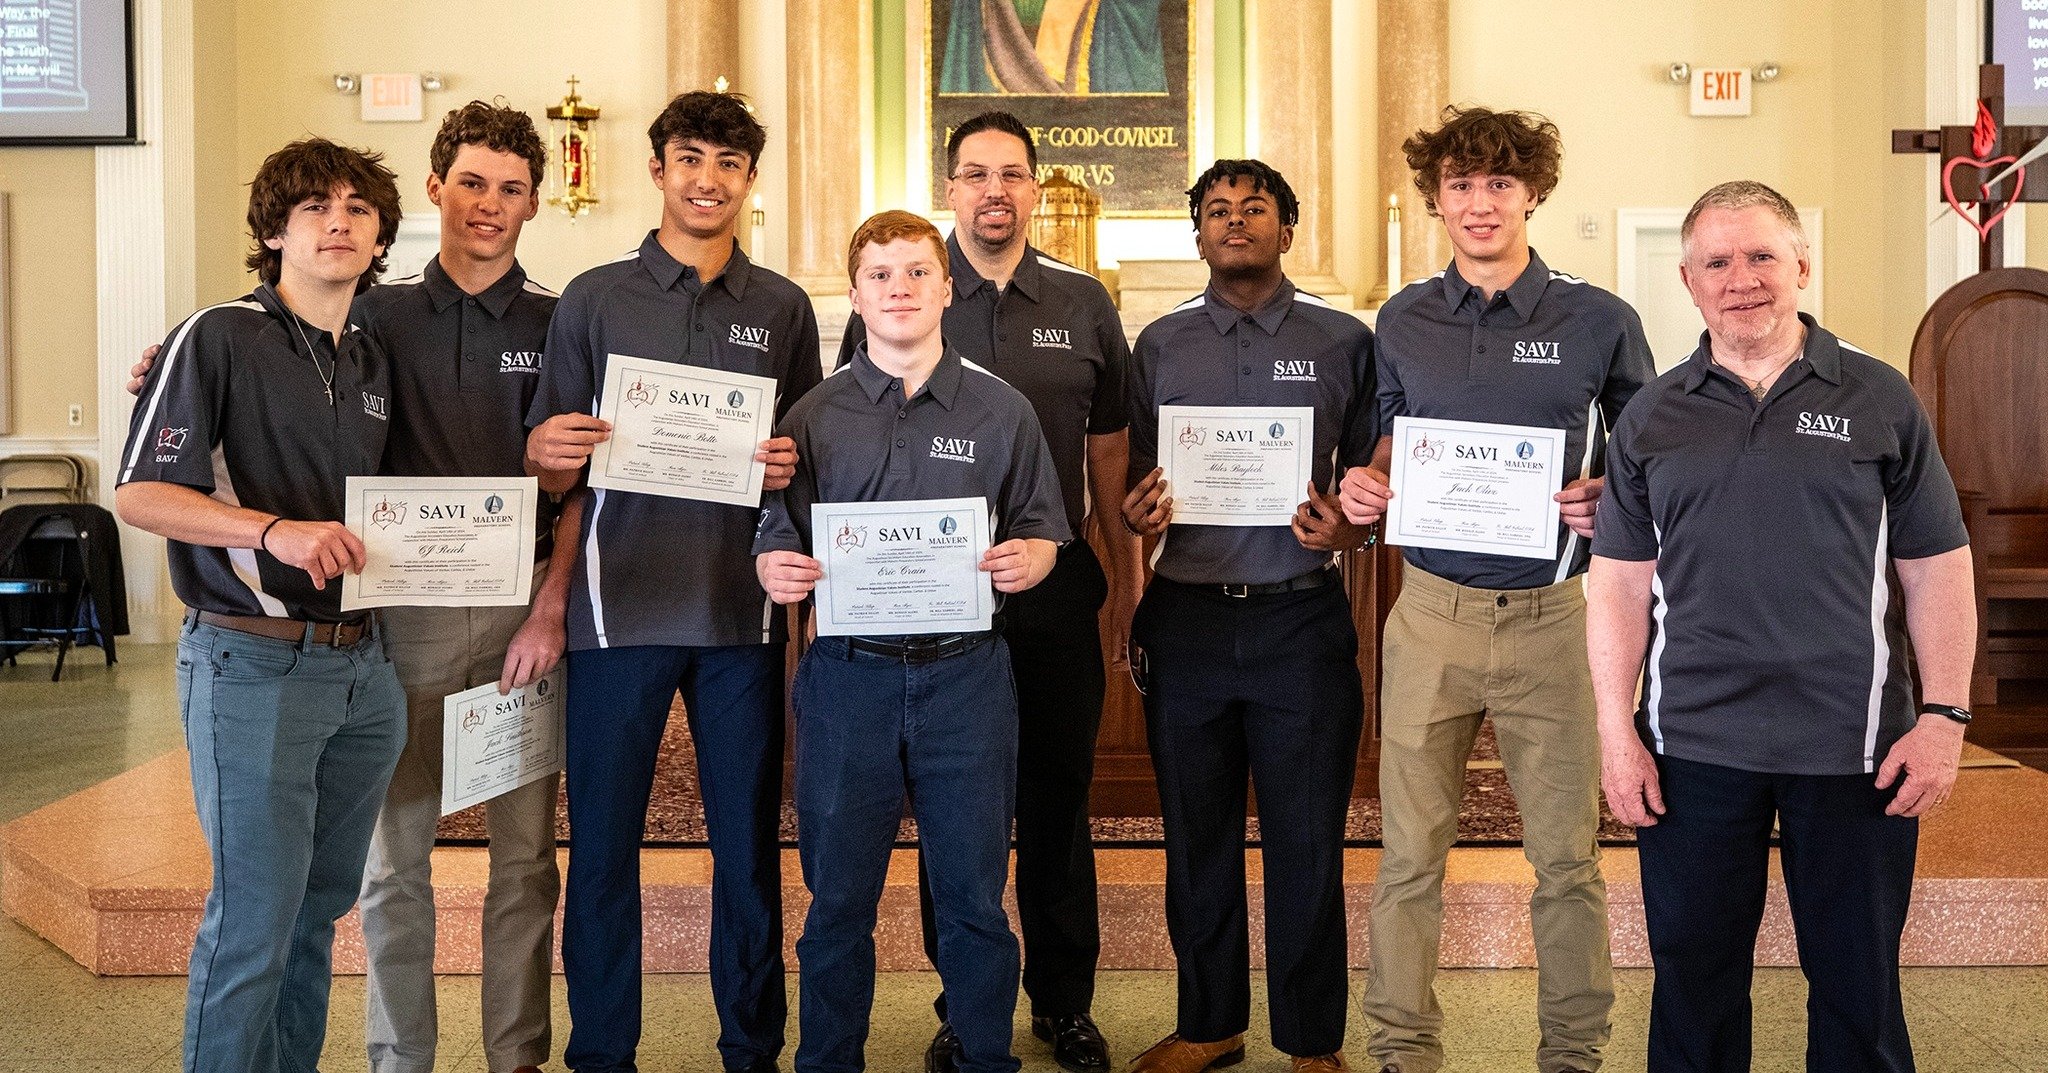 📸 Scenes from this year's SAVI experience. 

We thank Fr. Tony Burrascano, Dr. Zagarella, and Mr. Sharp for joining this year's group as they traveled to Malvern Prep for the four-day conference. 

Supported by the Order of St. Augustine across the 